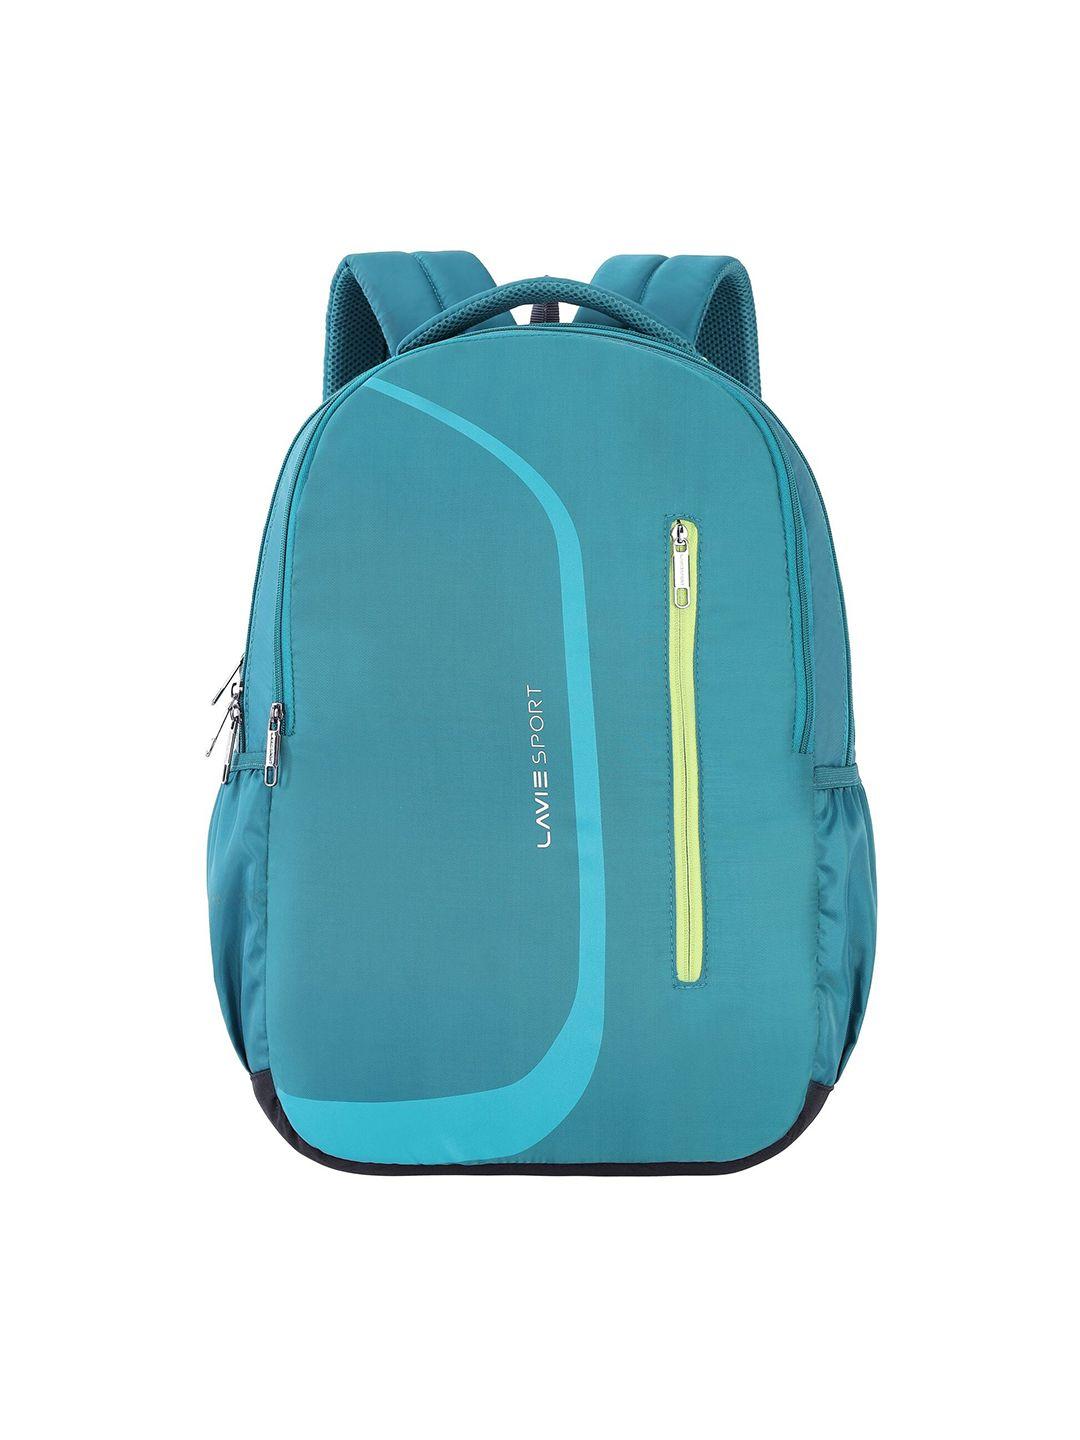 lavie sport unisex backpack up to 15 inch